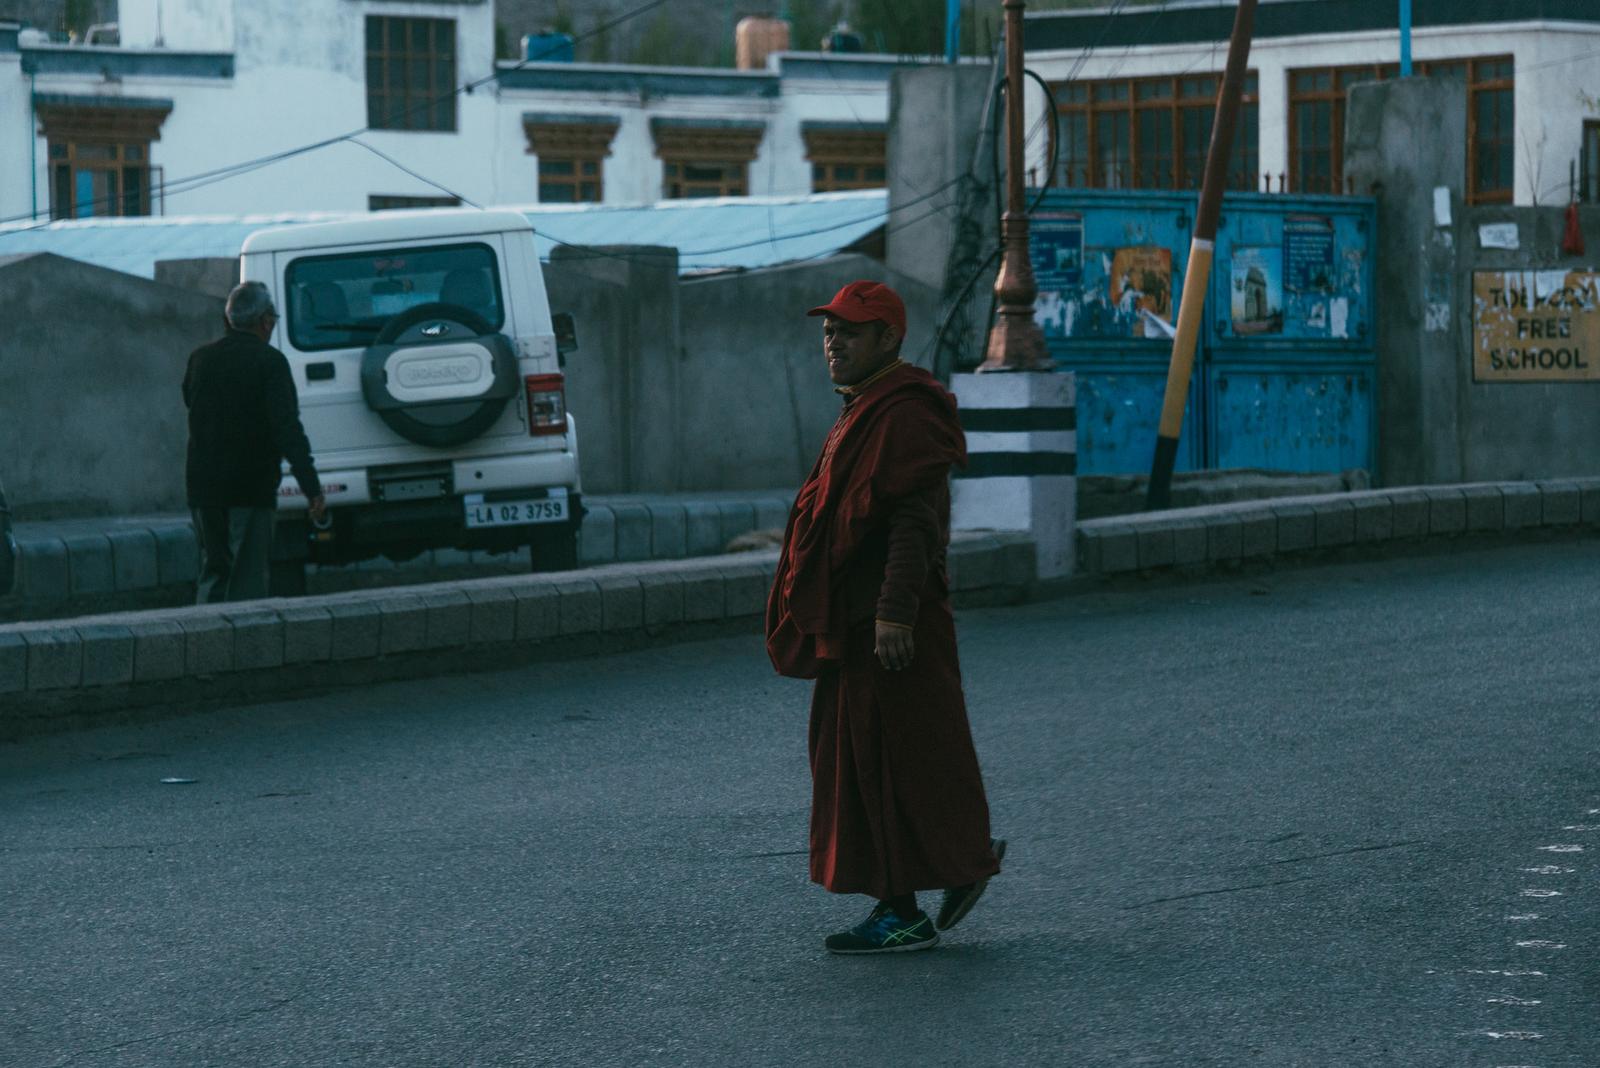 A Monk on the Street